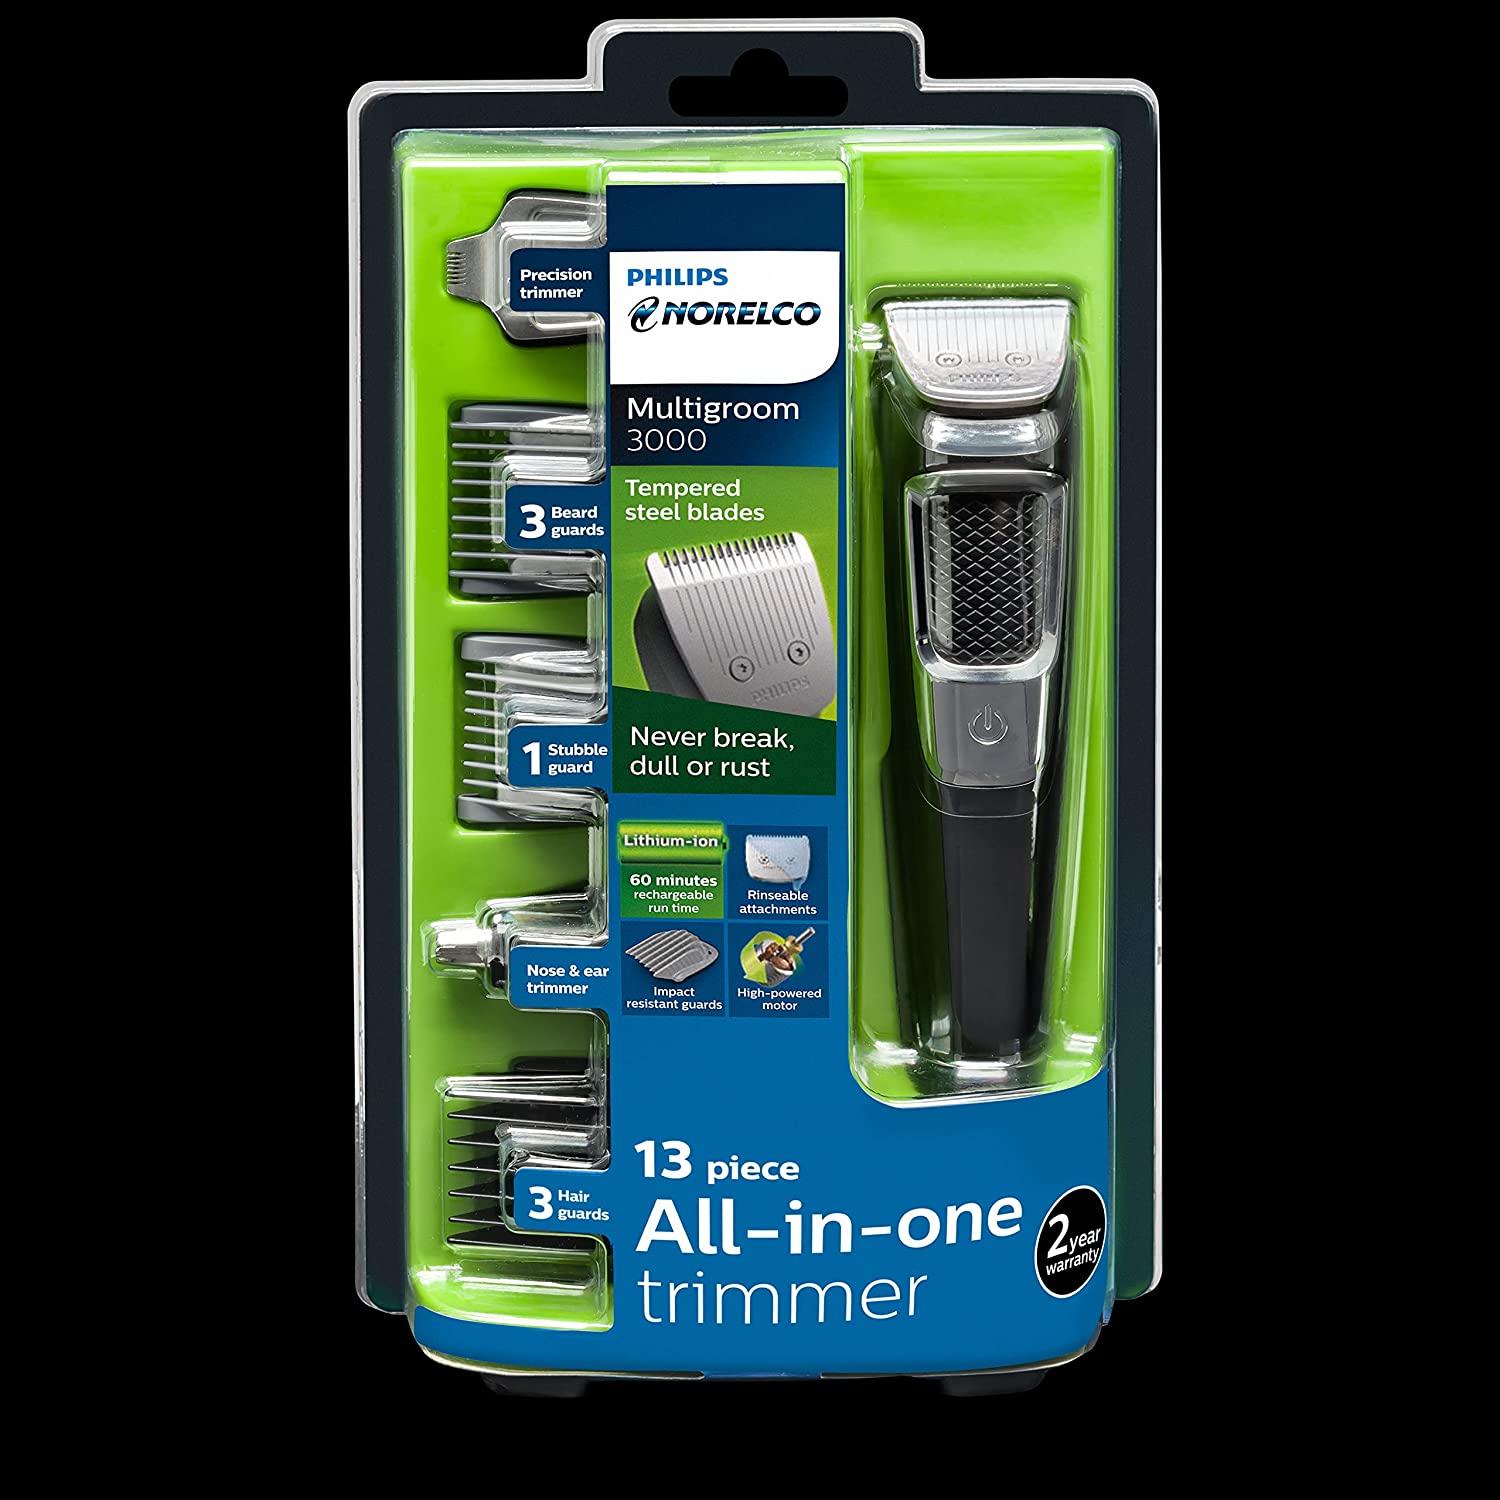 Philips Norelco All-in-One Trimmer 3000, 13 Piece -